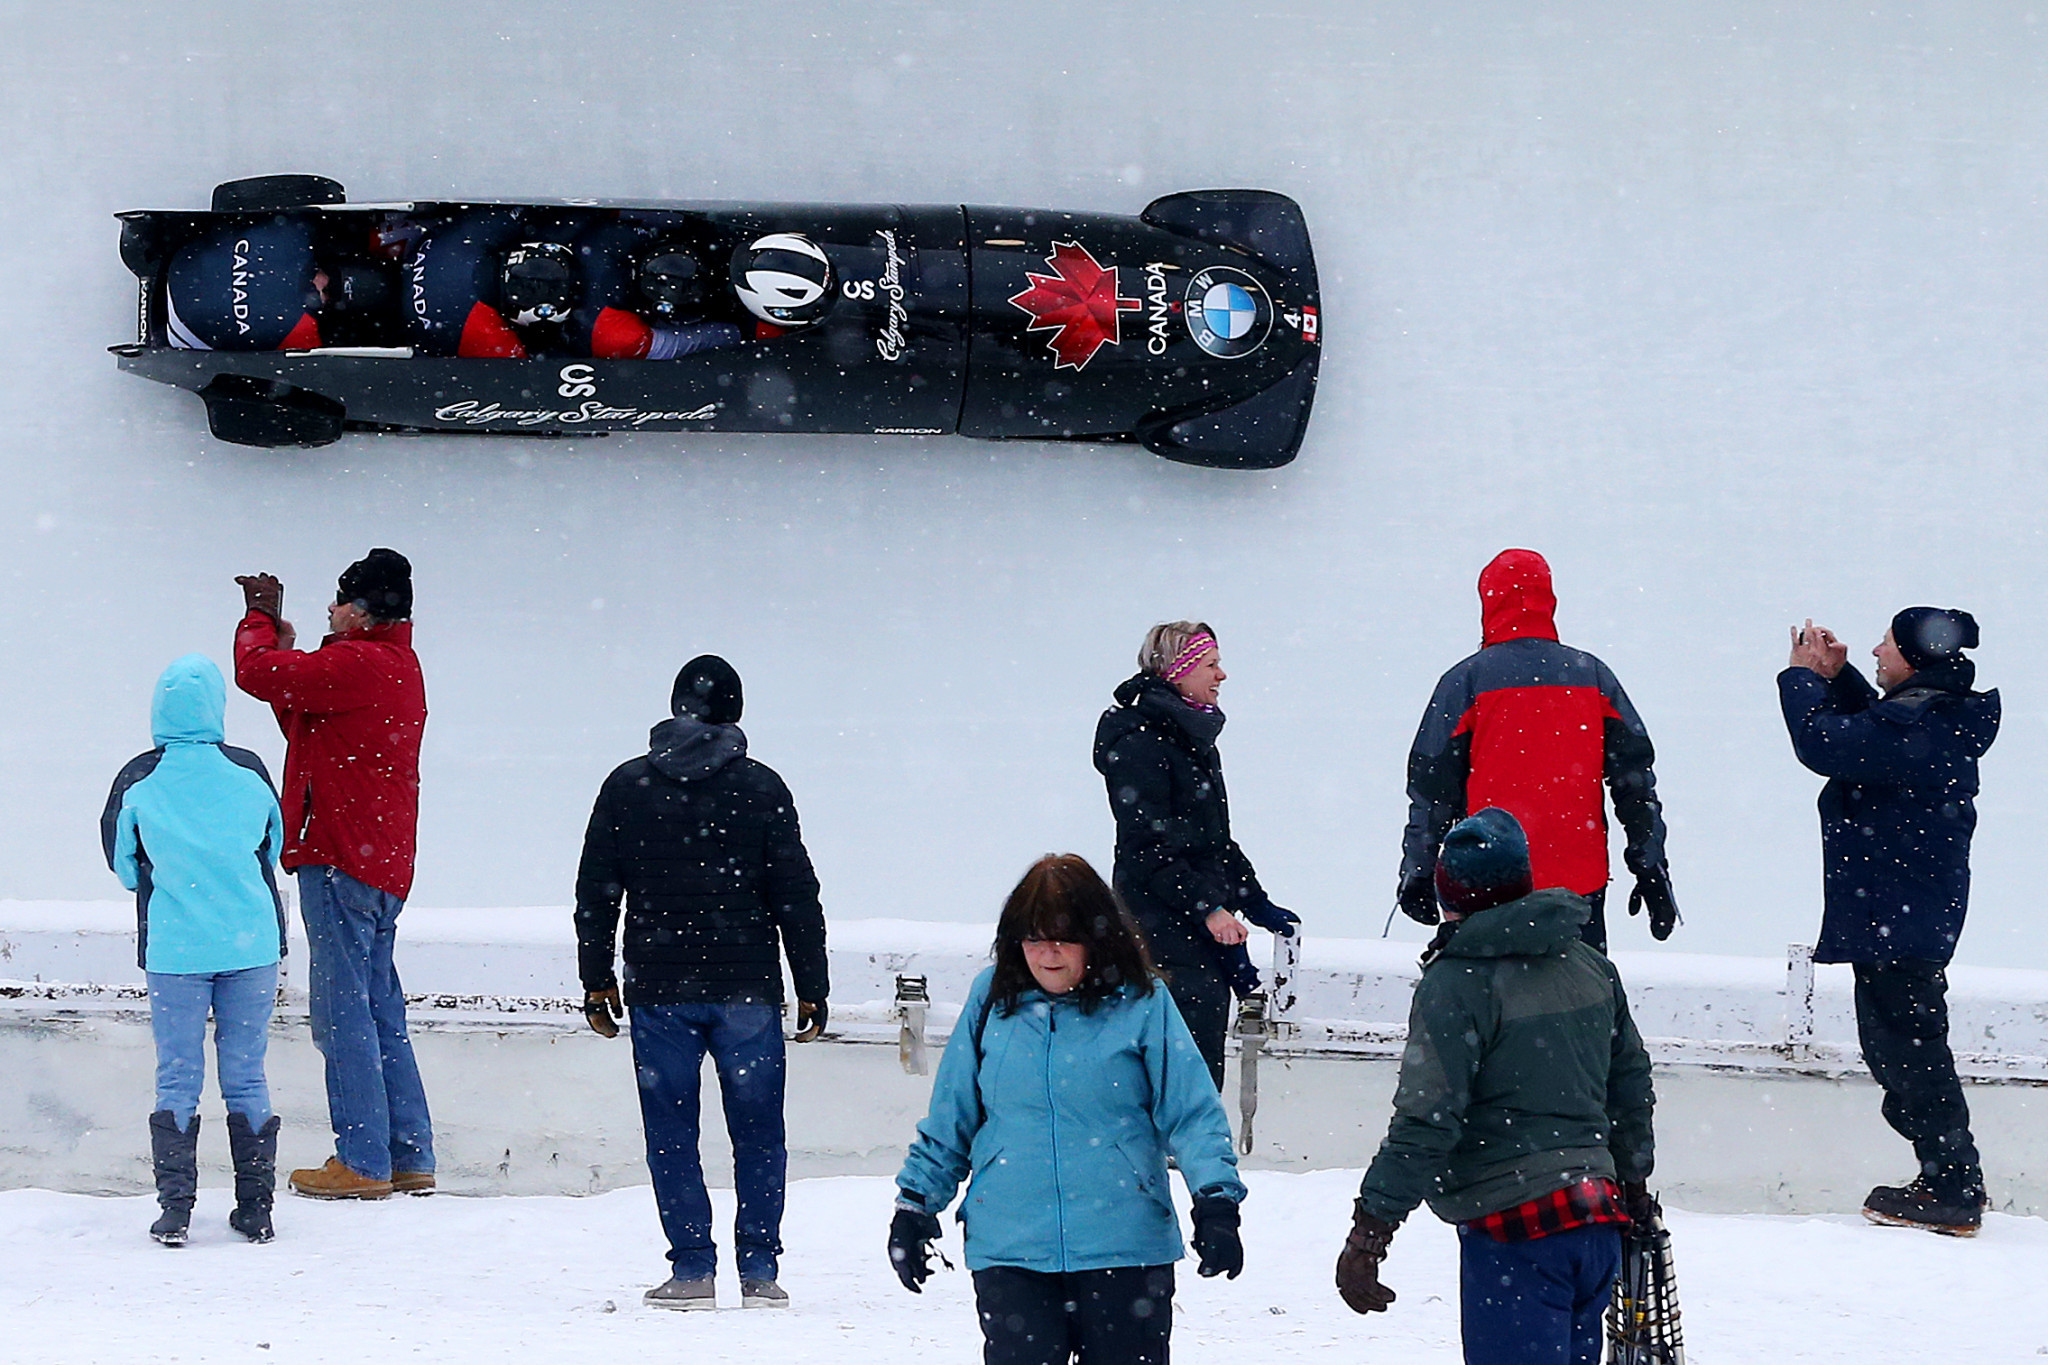 Four-man bobsleigh is now due to resume in the New Year ©Getty Images